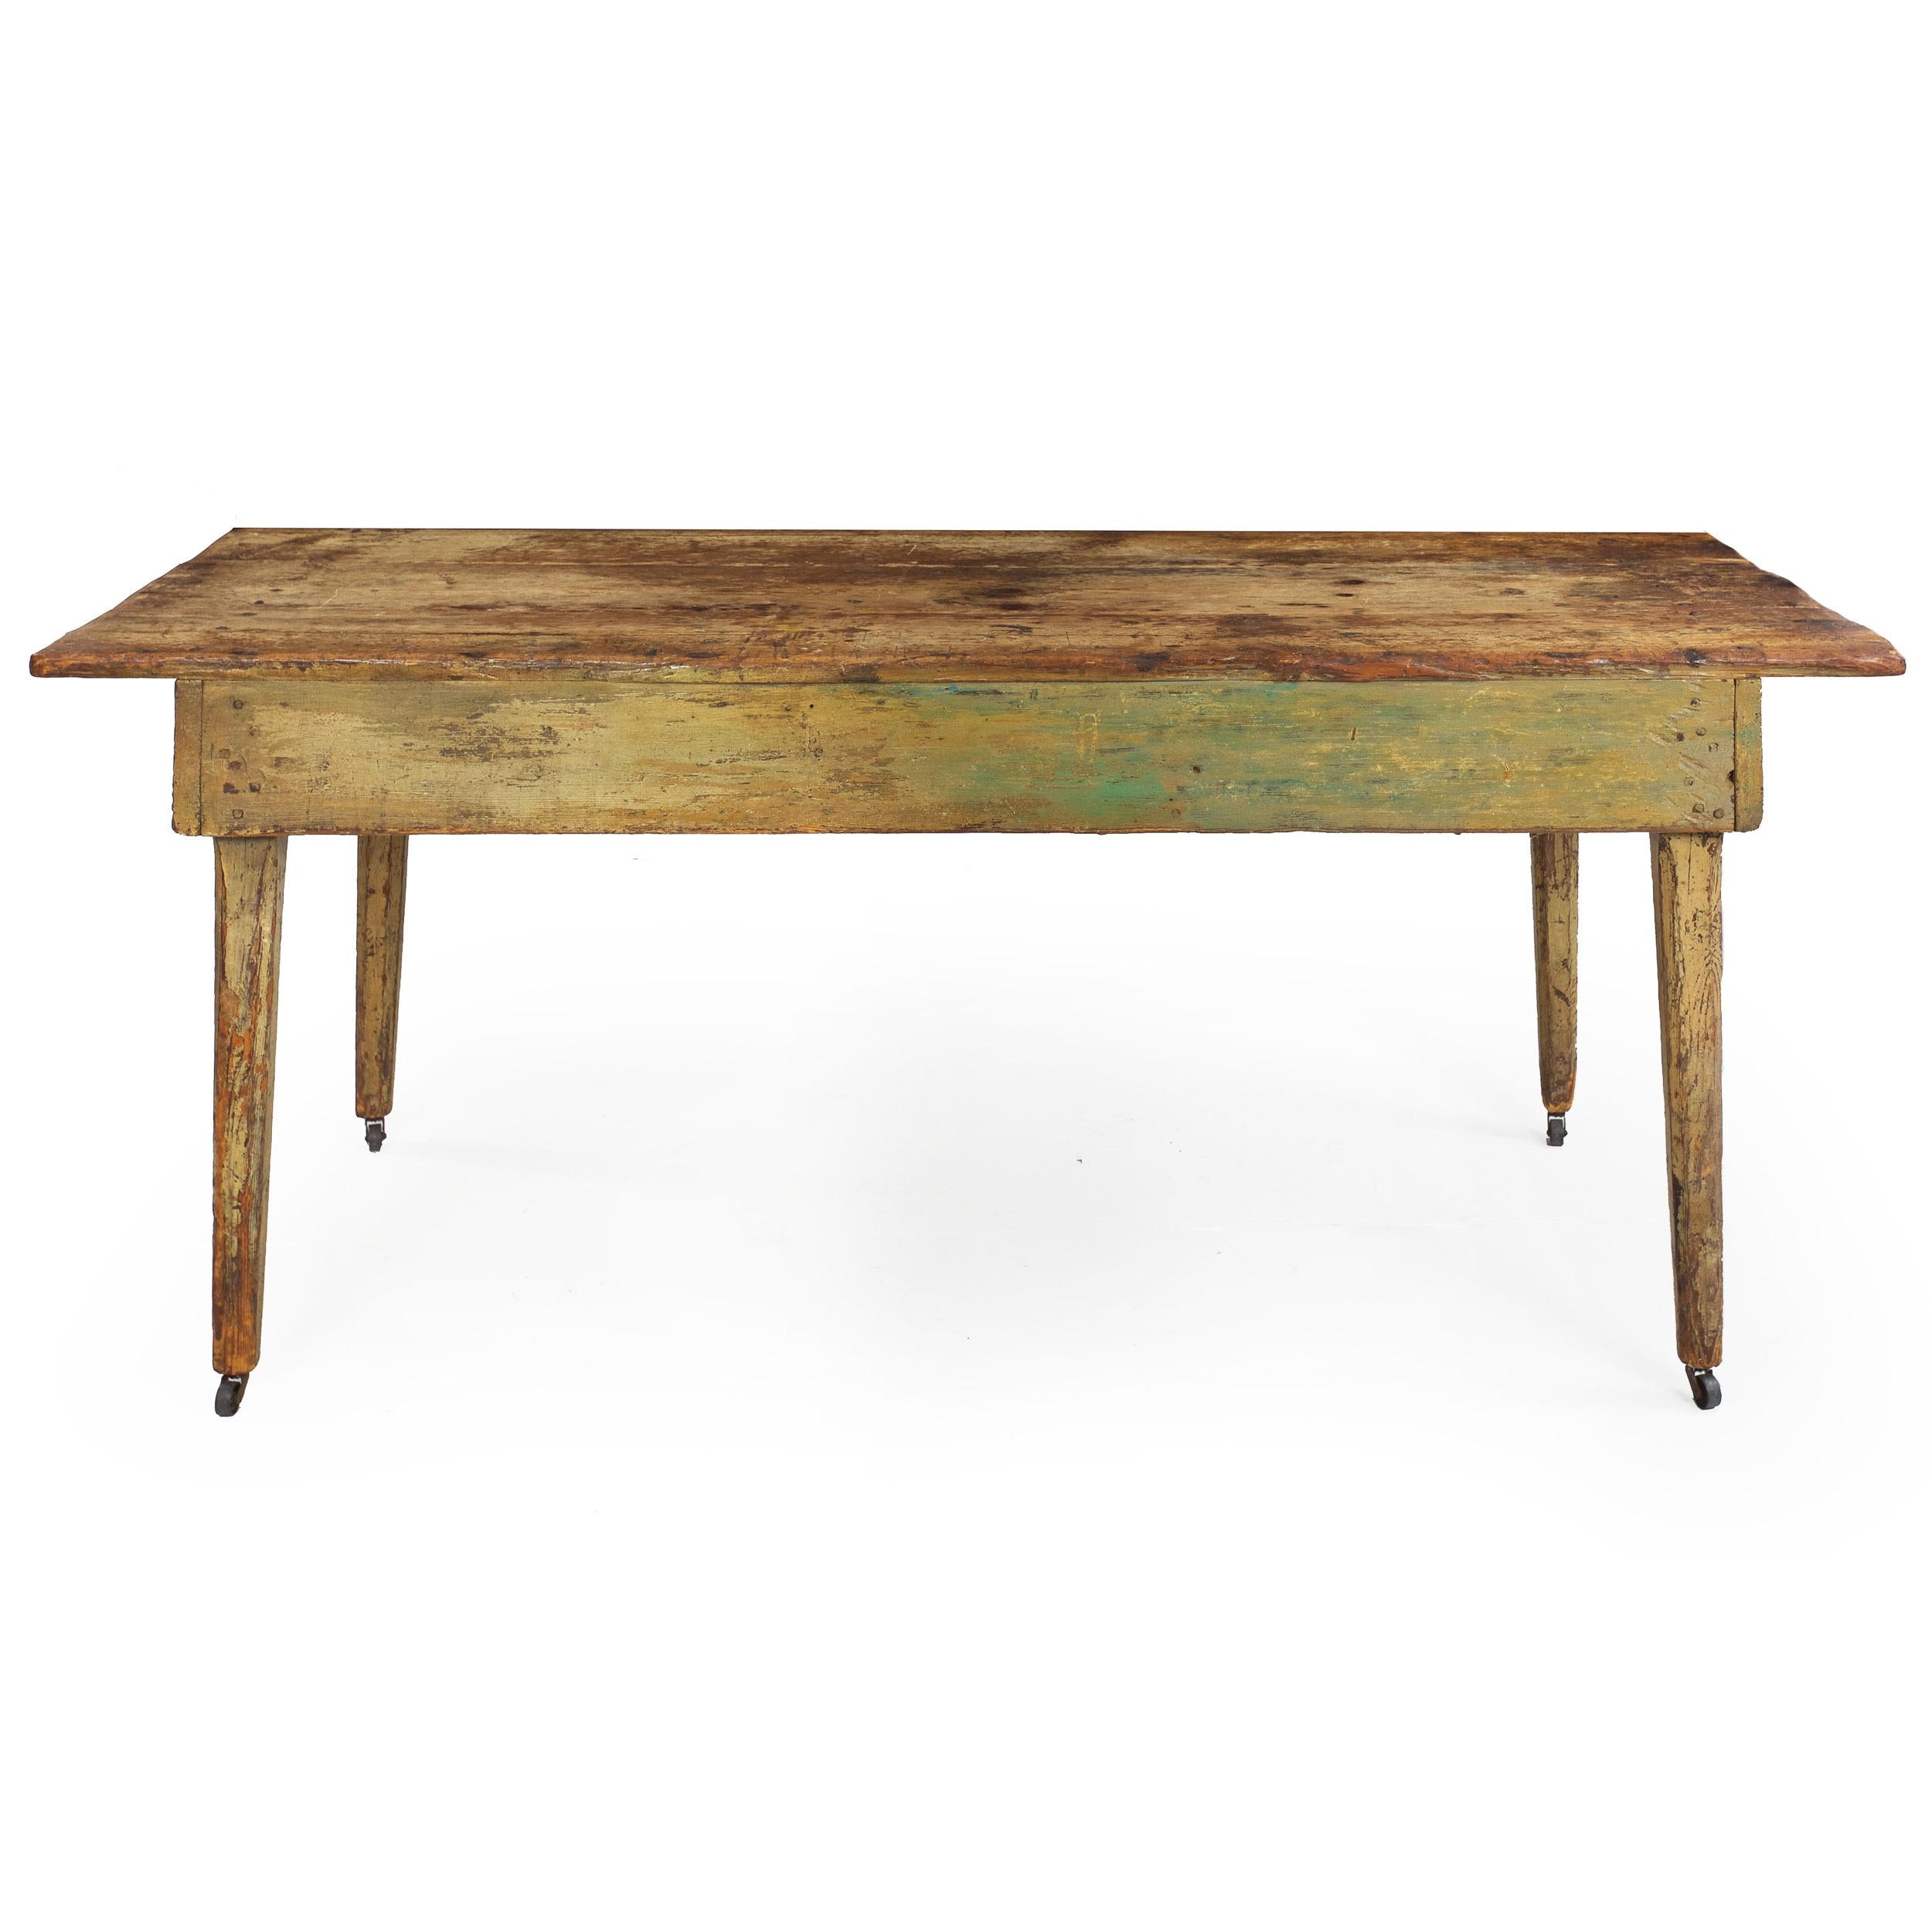 A wonderful scrubbed pine preparation table for the kitchen spaces, it features three positively broad pine planks for the top with an absolutely gorgeous patina throughout. They exhibit a fine historical surface with old knife cut marks, stains and